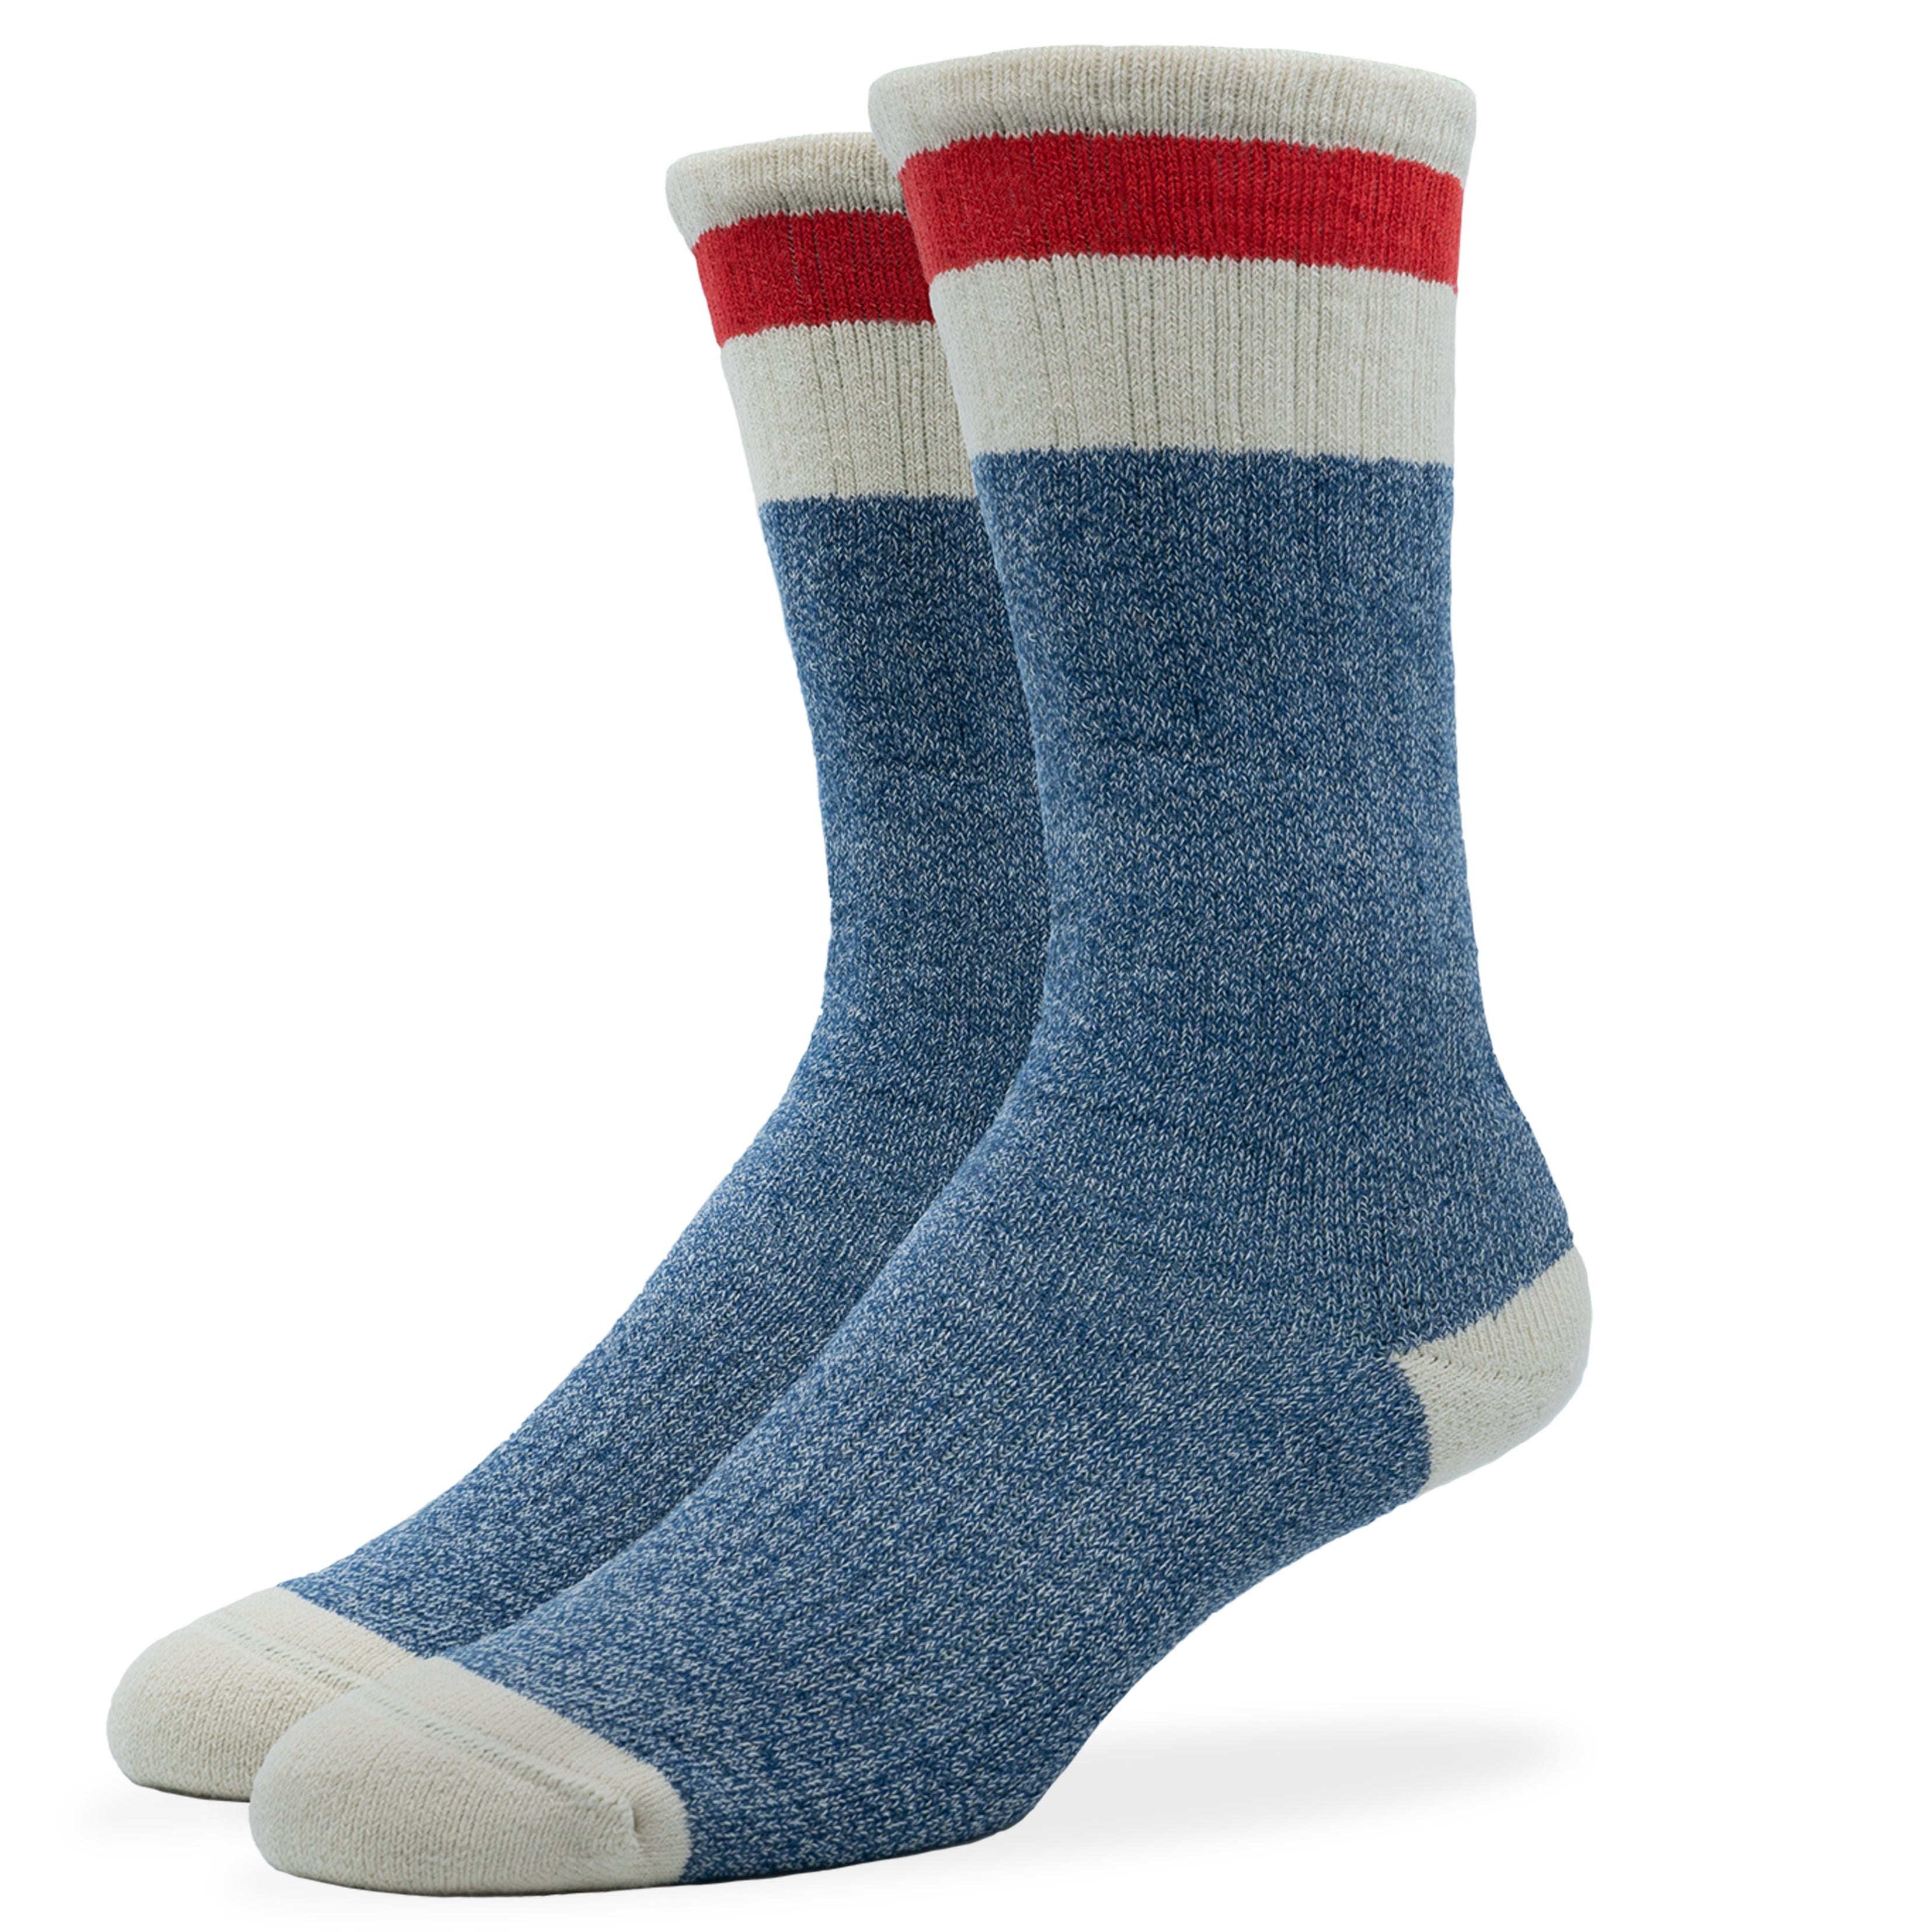 SILVER BOOT SOCKS  BLUE RED – SixSox